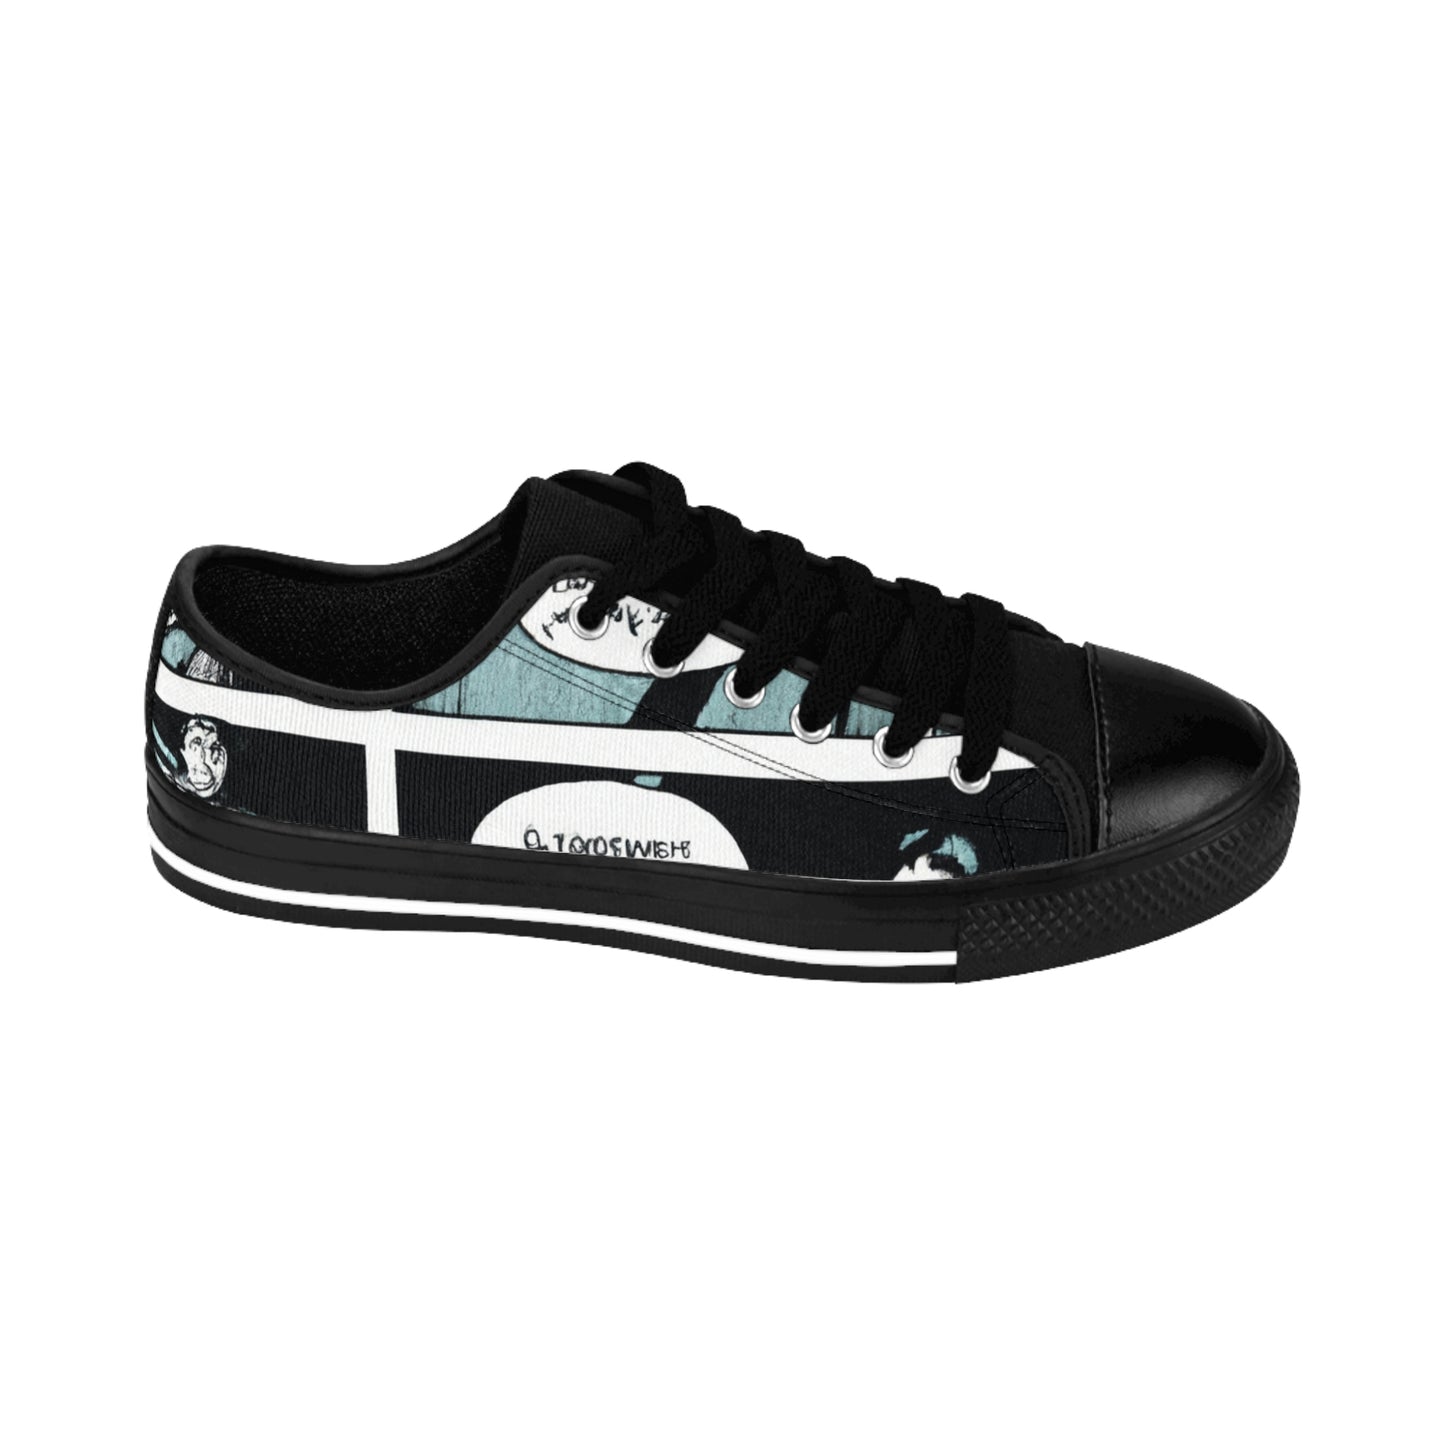 .

Heinz the Outfitter - Comic Book Low Top